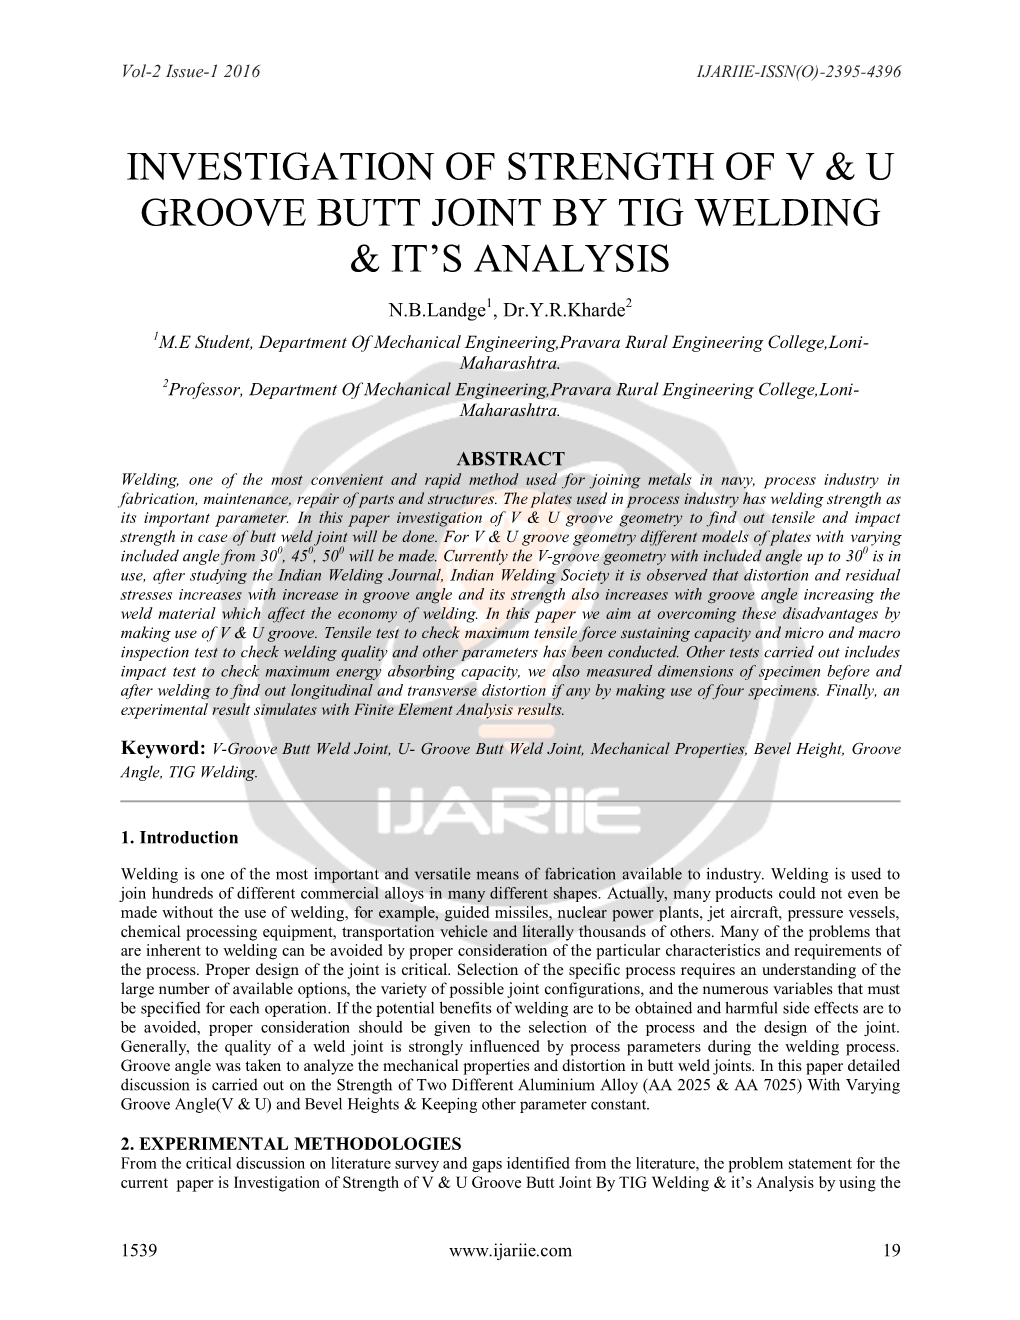 Investigation of Strength of V & U Groove Butt Joint by Tig